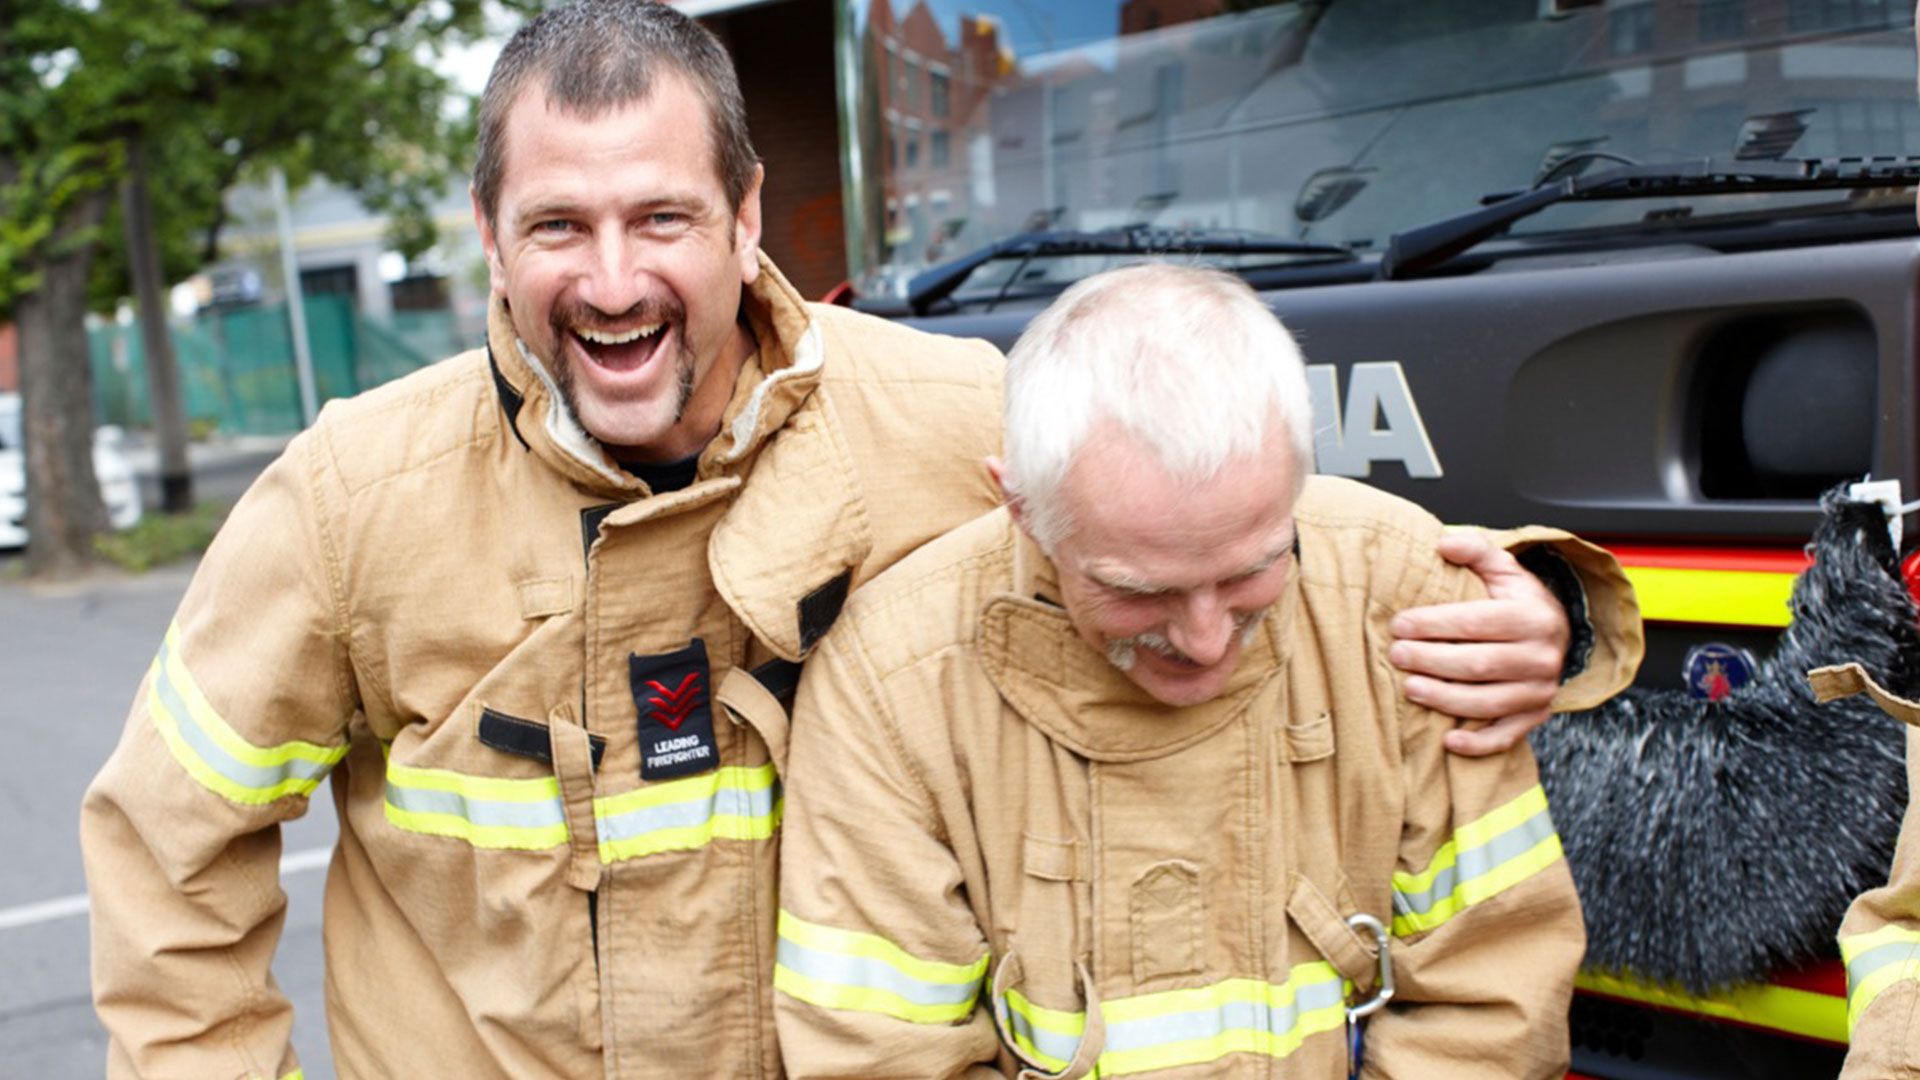 Two firefighters standing arm in arm and smiling